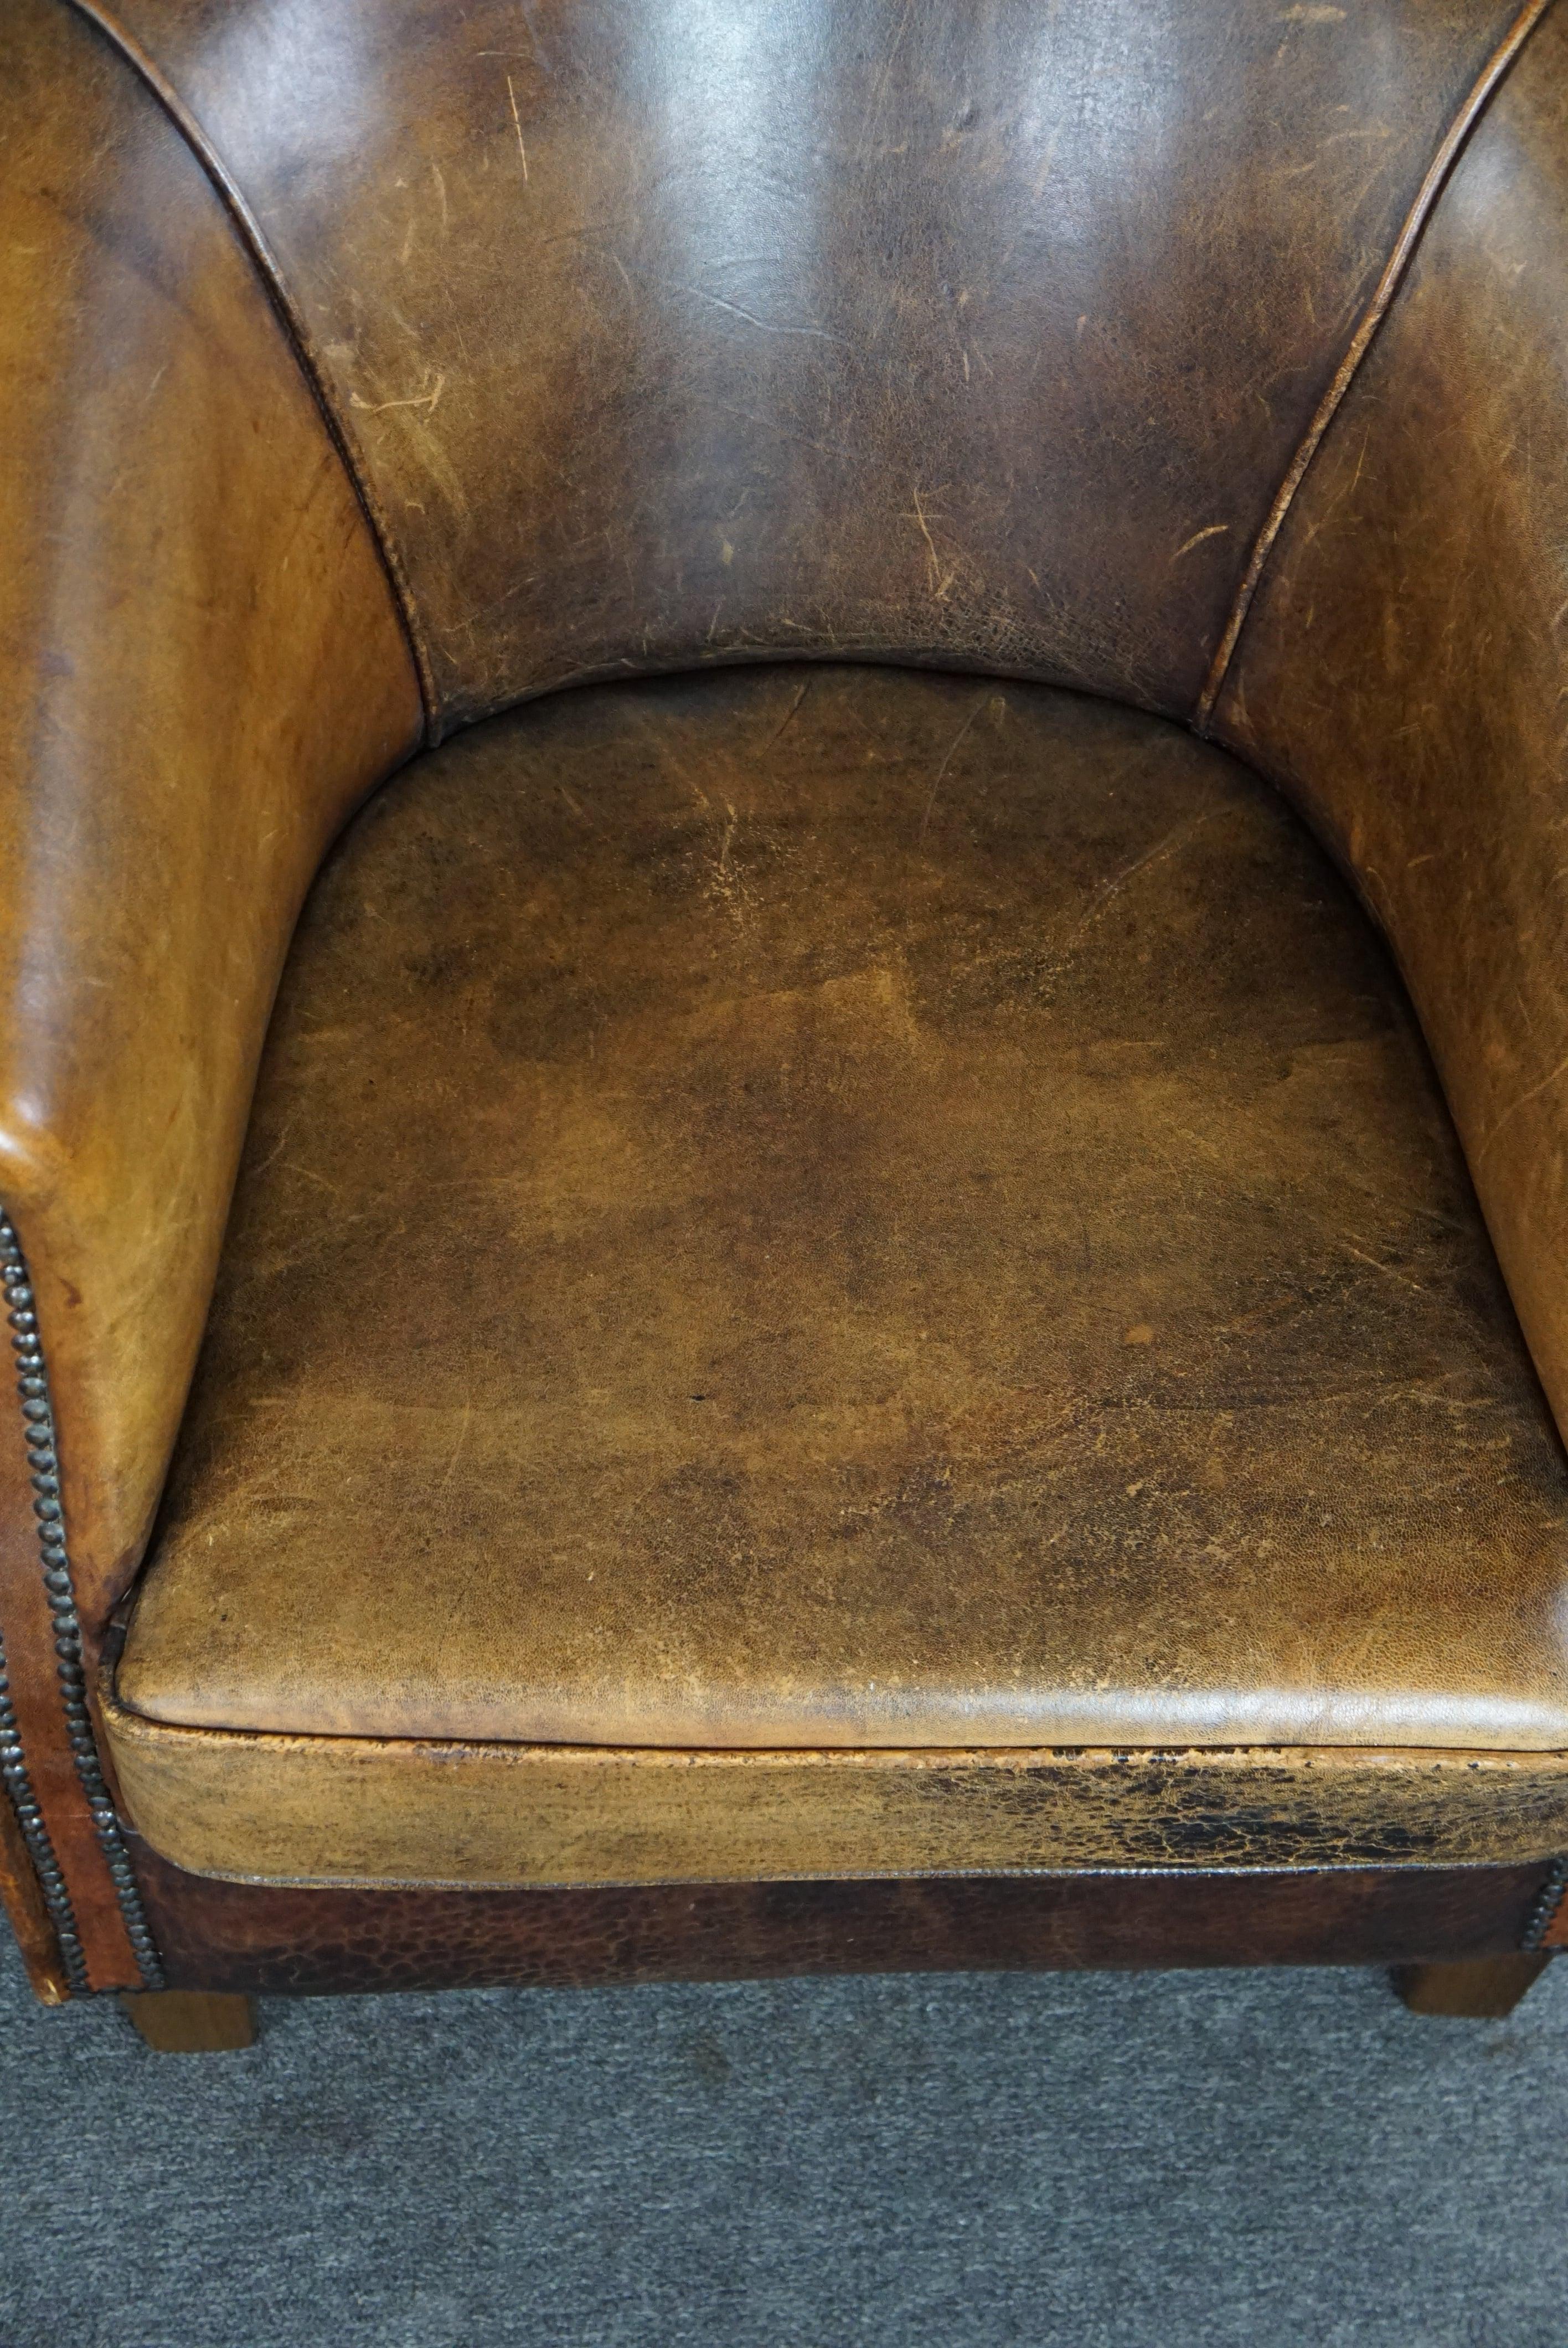 Leather Set of two sturdy sheep leather club chairs, beautiful dark cognac color